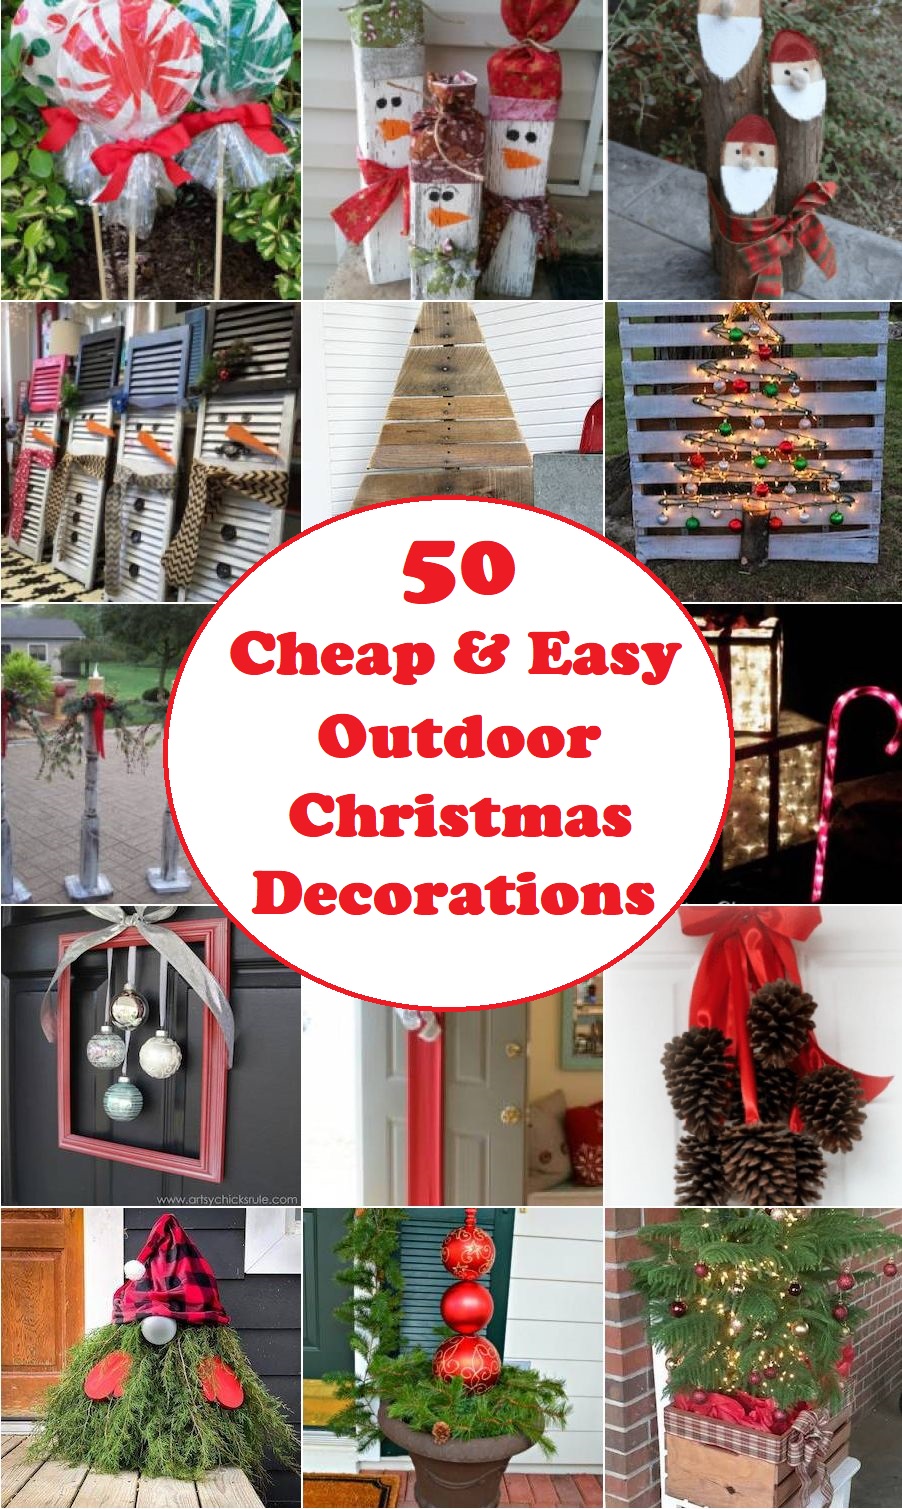 50 Cheap & Easy Outdoor Christmas Decorations